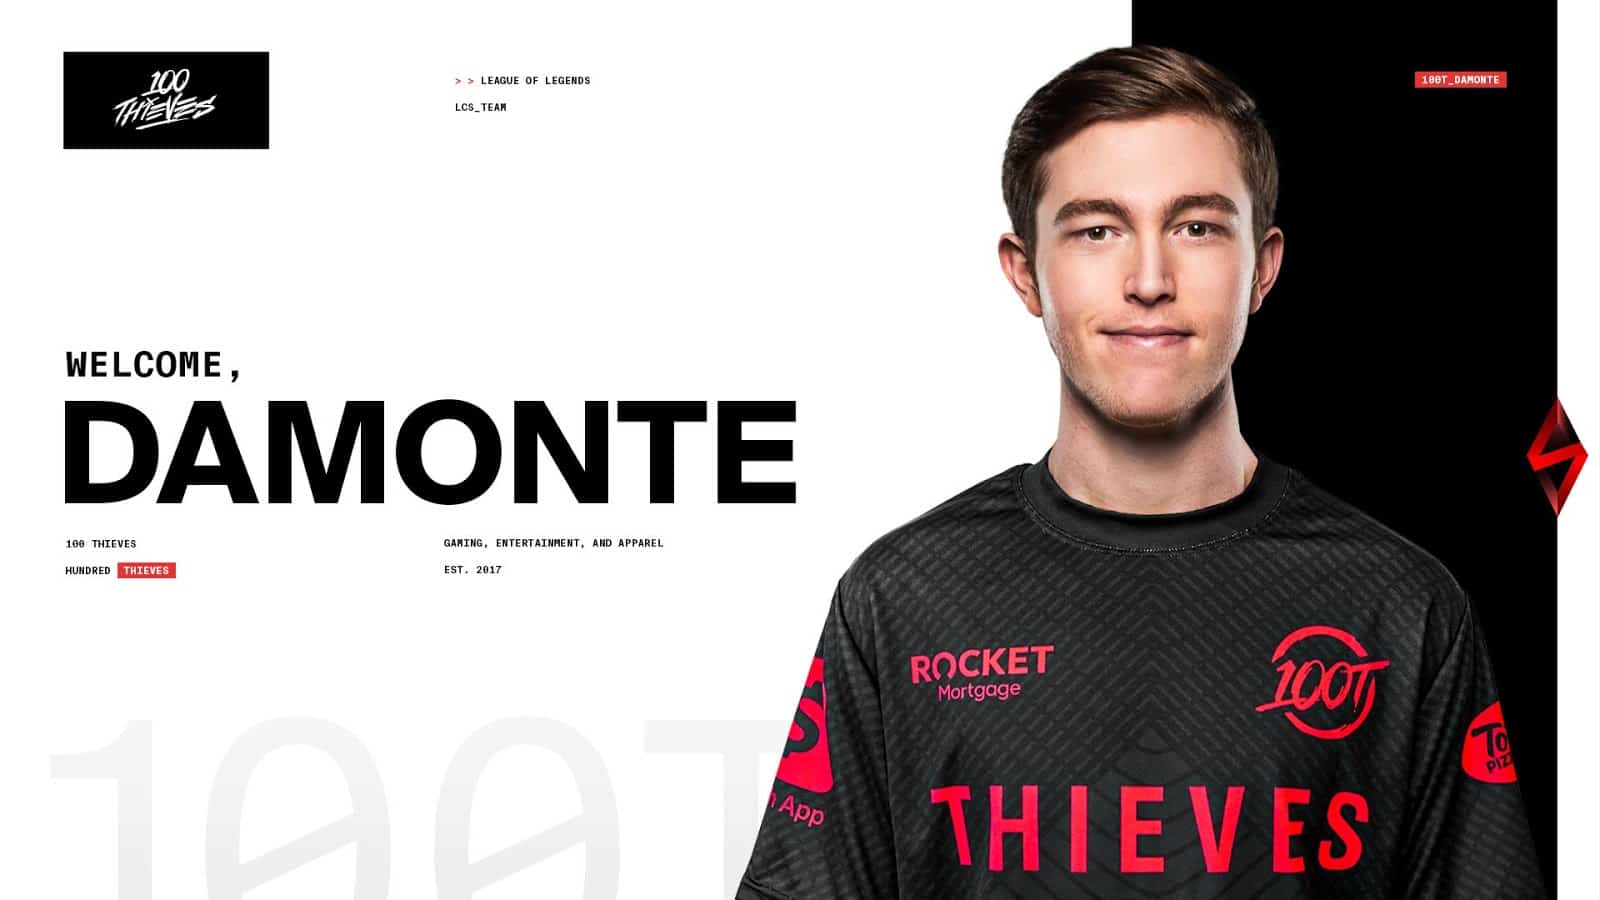 LoL: 100 Thieves Finalize 2021 Roster With Damonte Signing